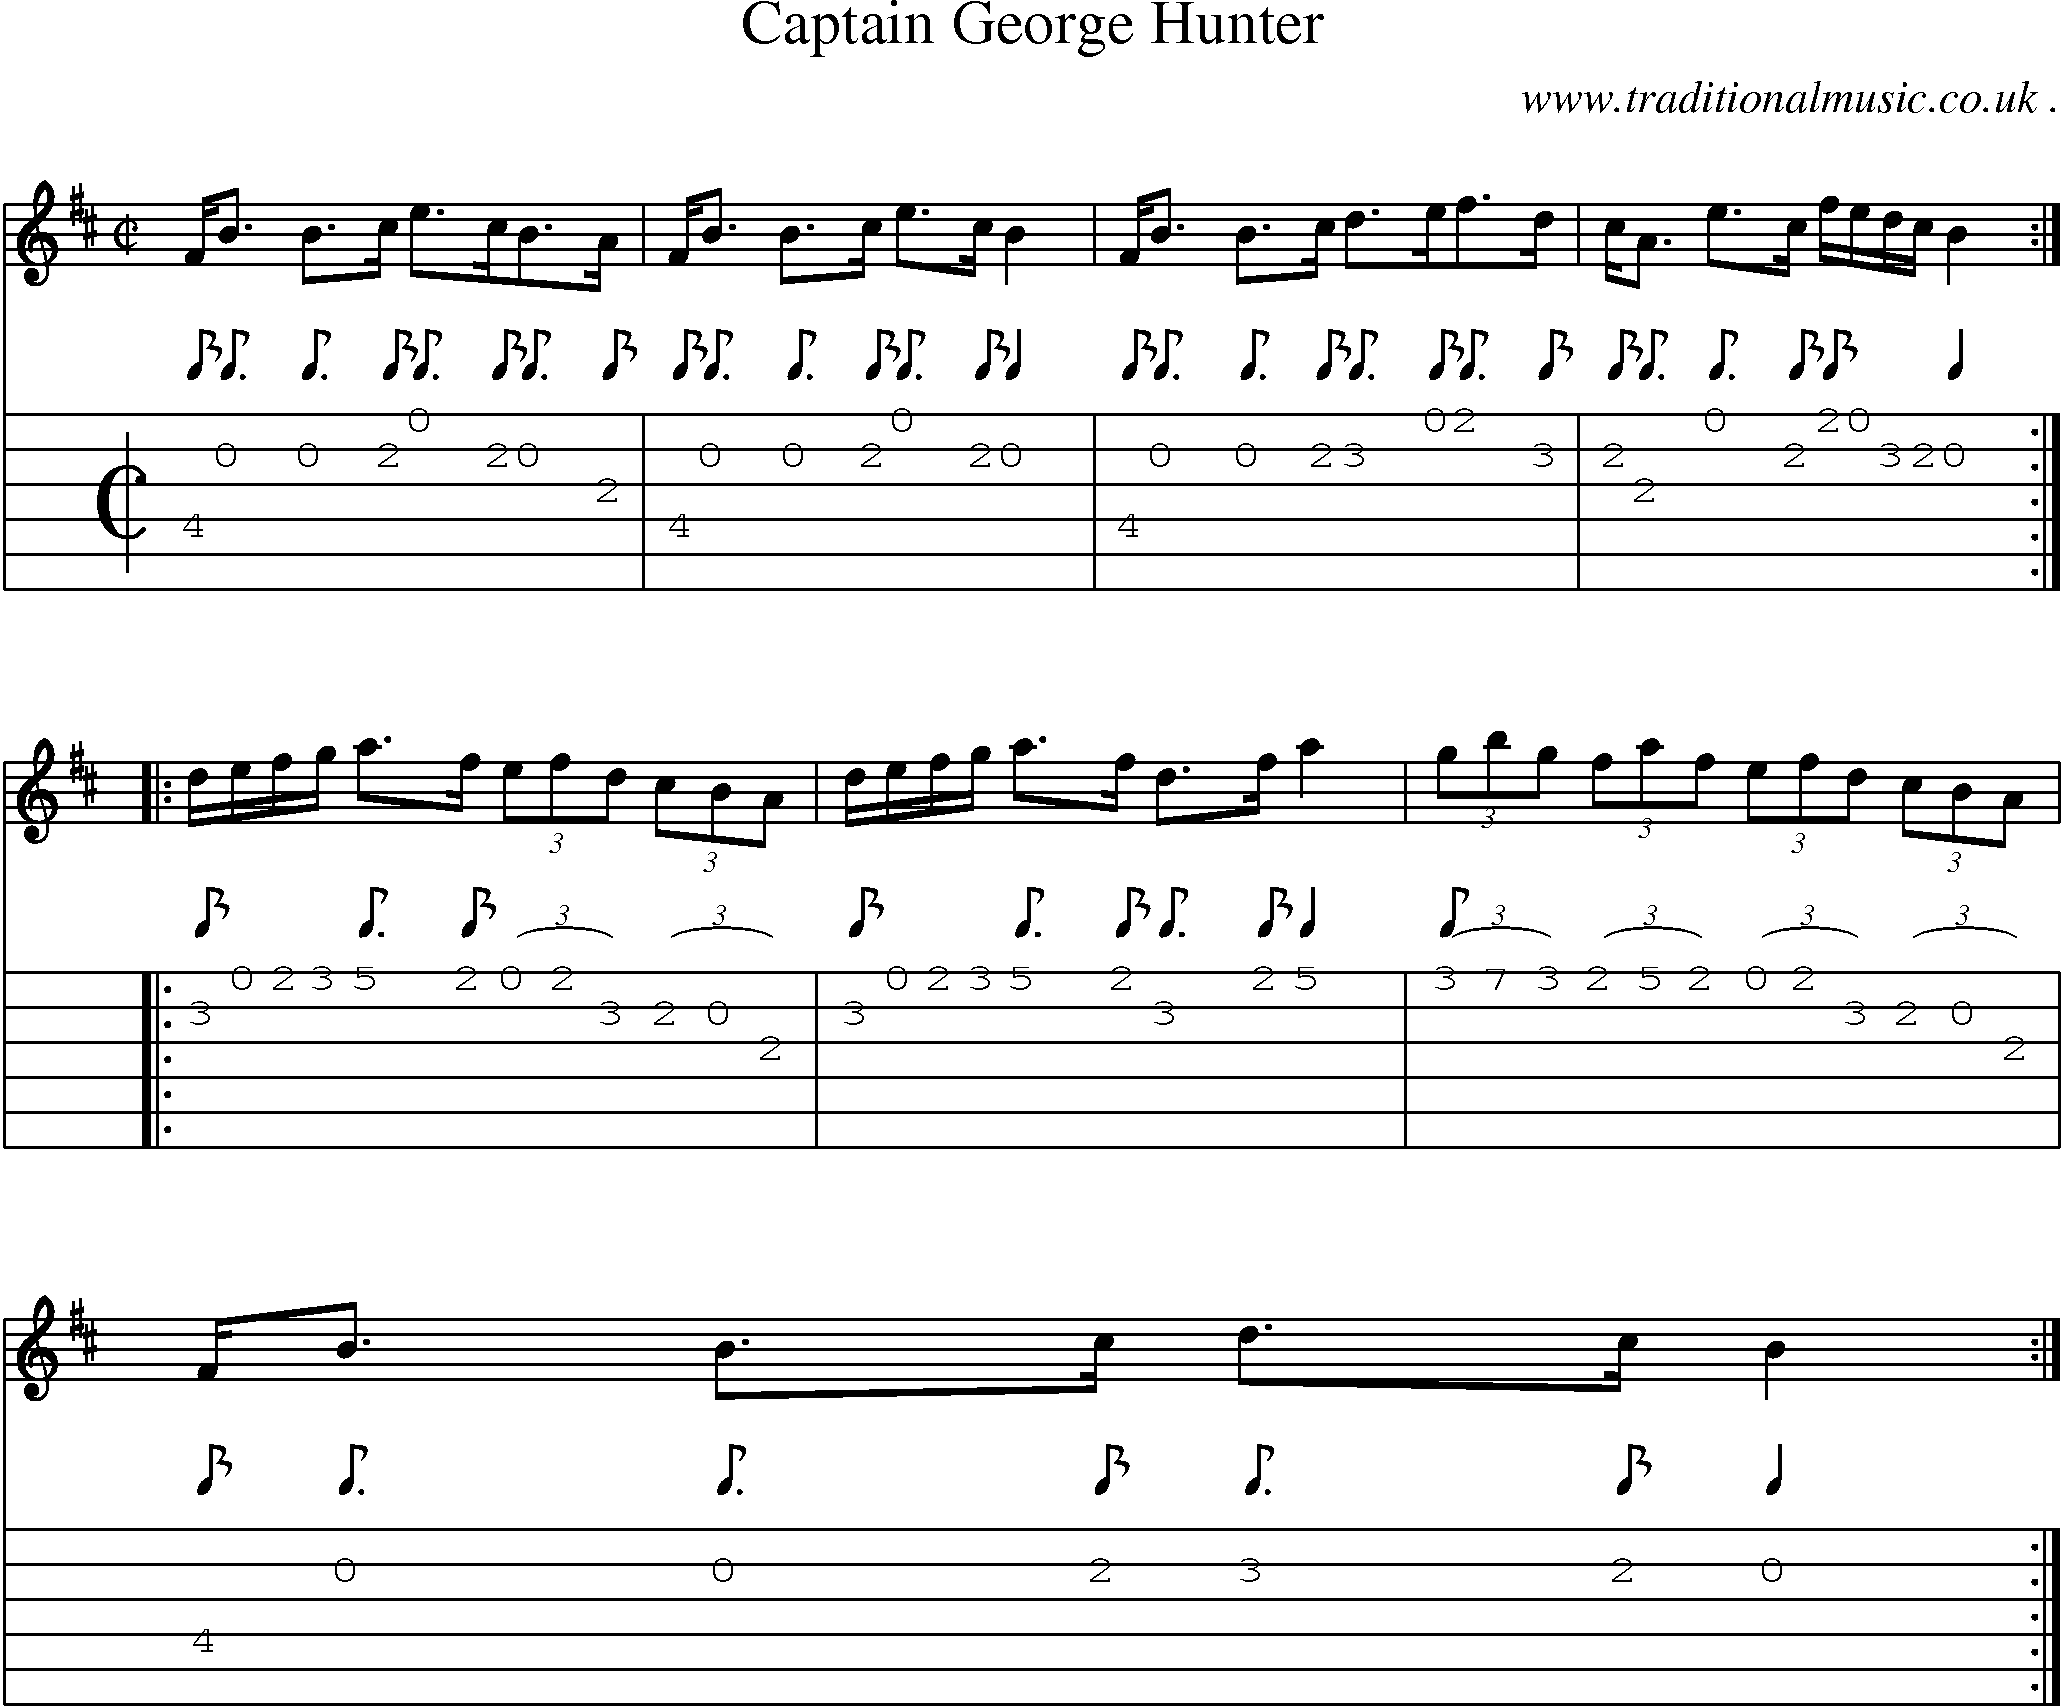 Sheet-music  score, Chords and Guitar Tabs for Captain George Hunter